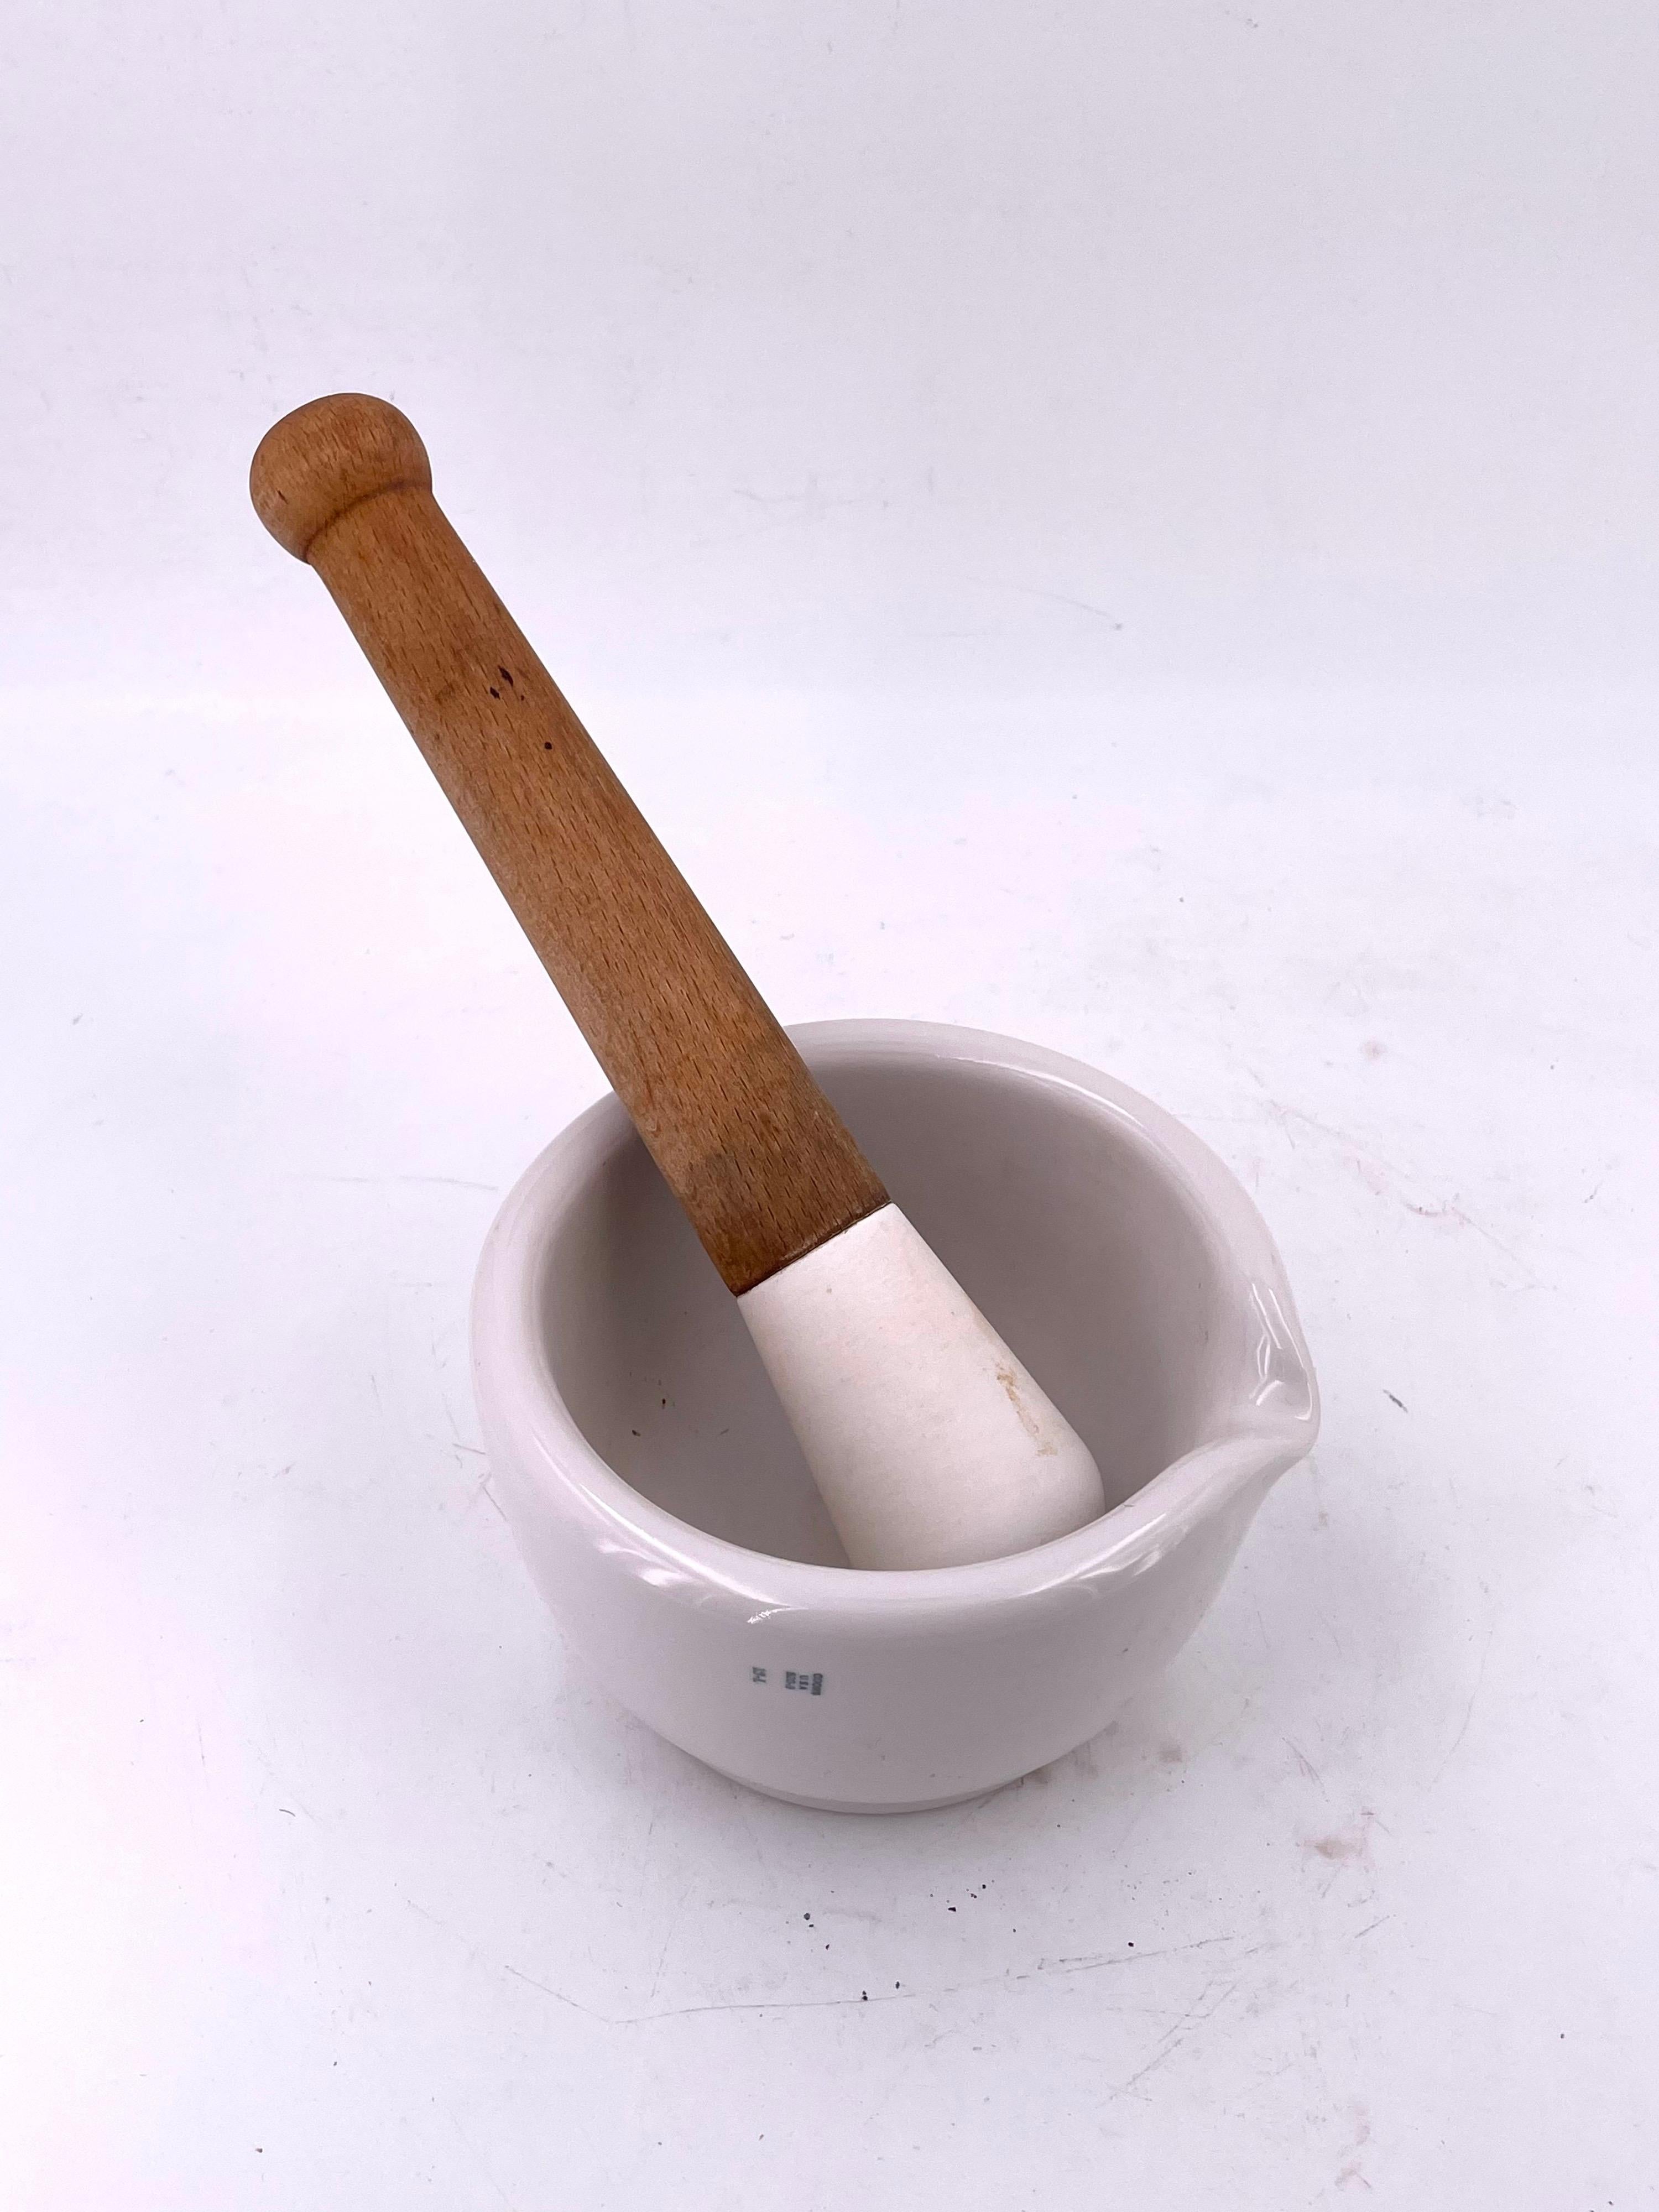 Porcelain mortar and pestle. Great for cooks or as an accent piece. Heavy duty. By Coors USA.